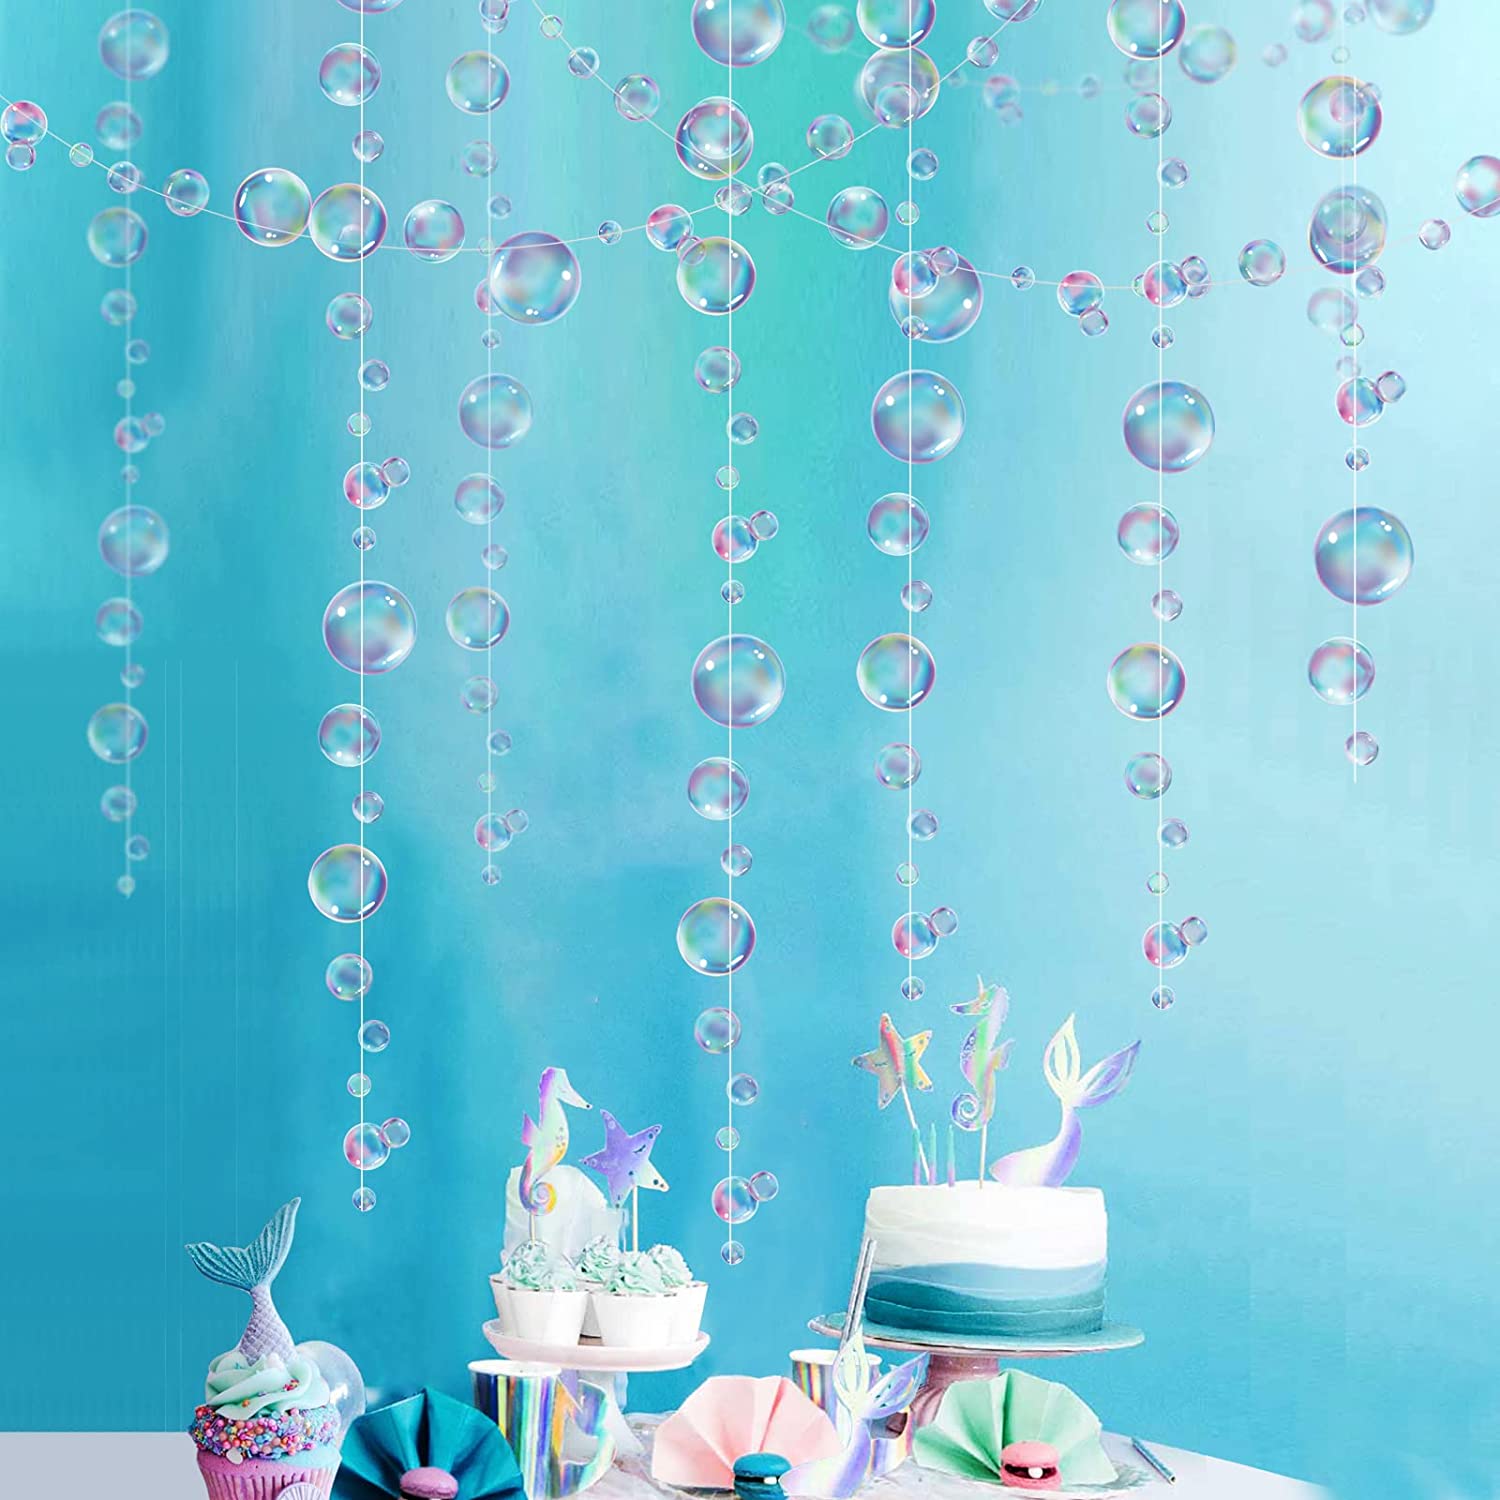 White Transparent Bubble Garlands for Party Decorations Hanging Floating Bubbles Cutout Streamer Background for Mermaid Under The Sea Birthday Home Kids Room Prom Wedding Baby Shower Decor 